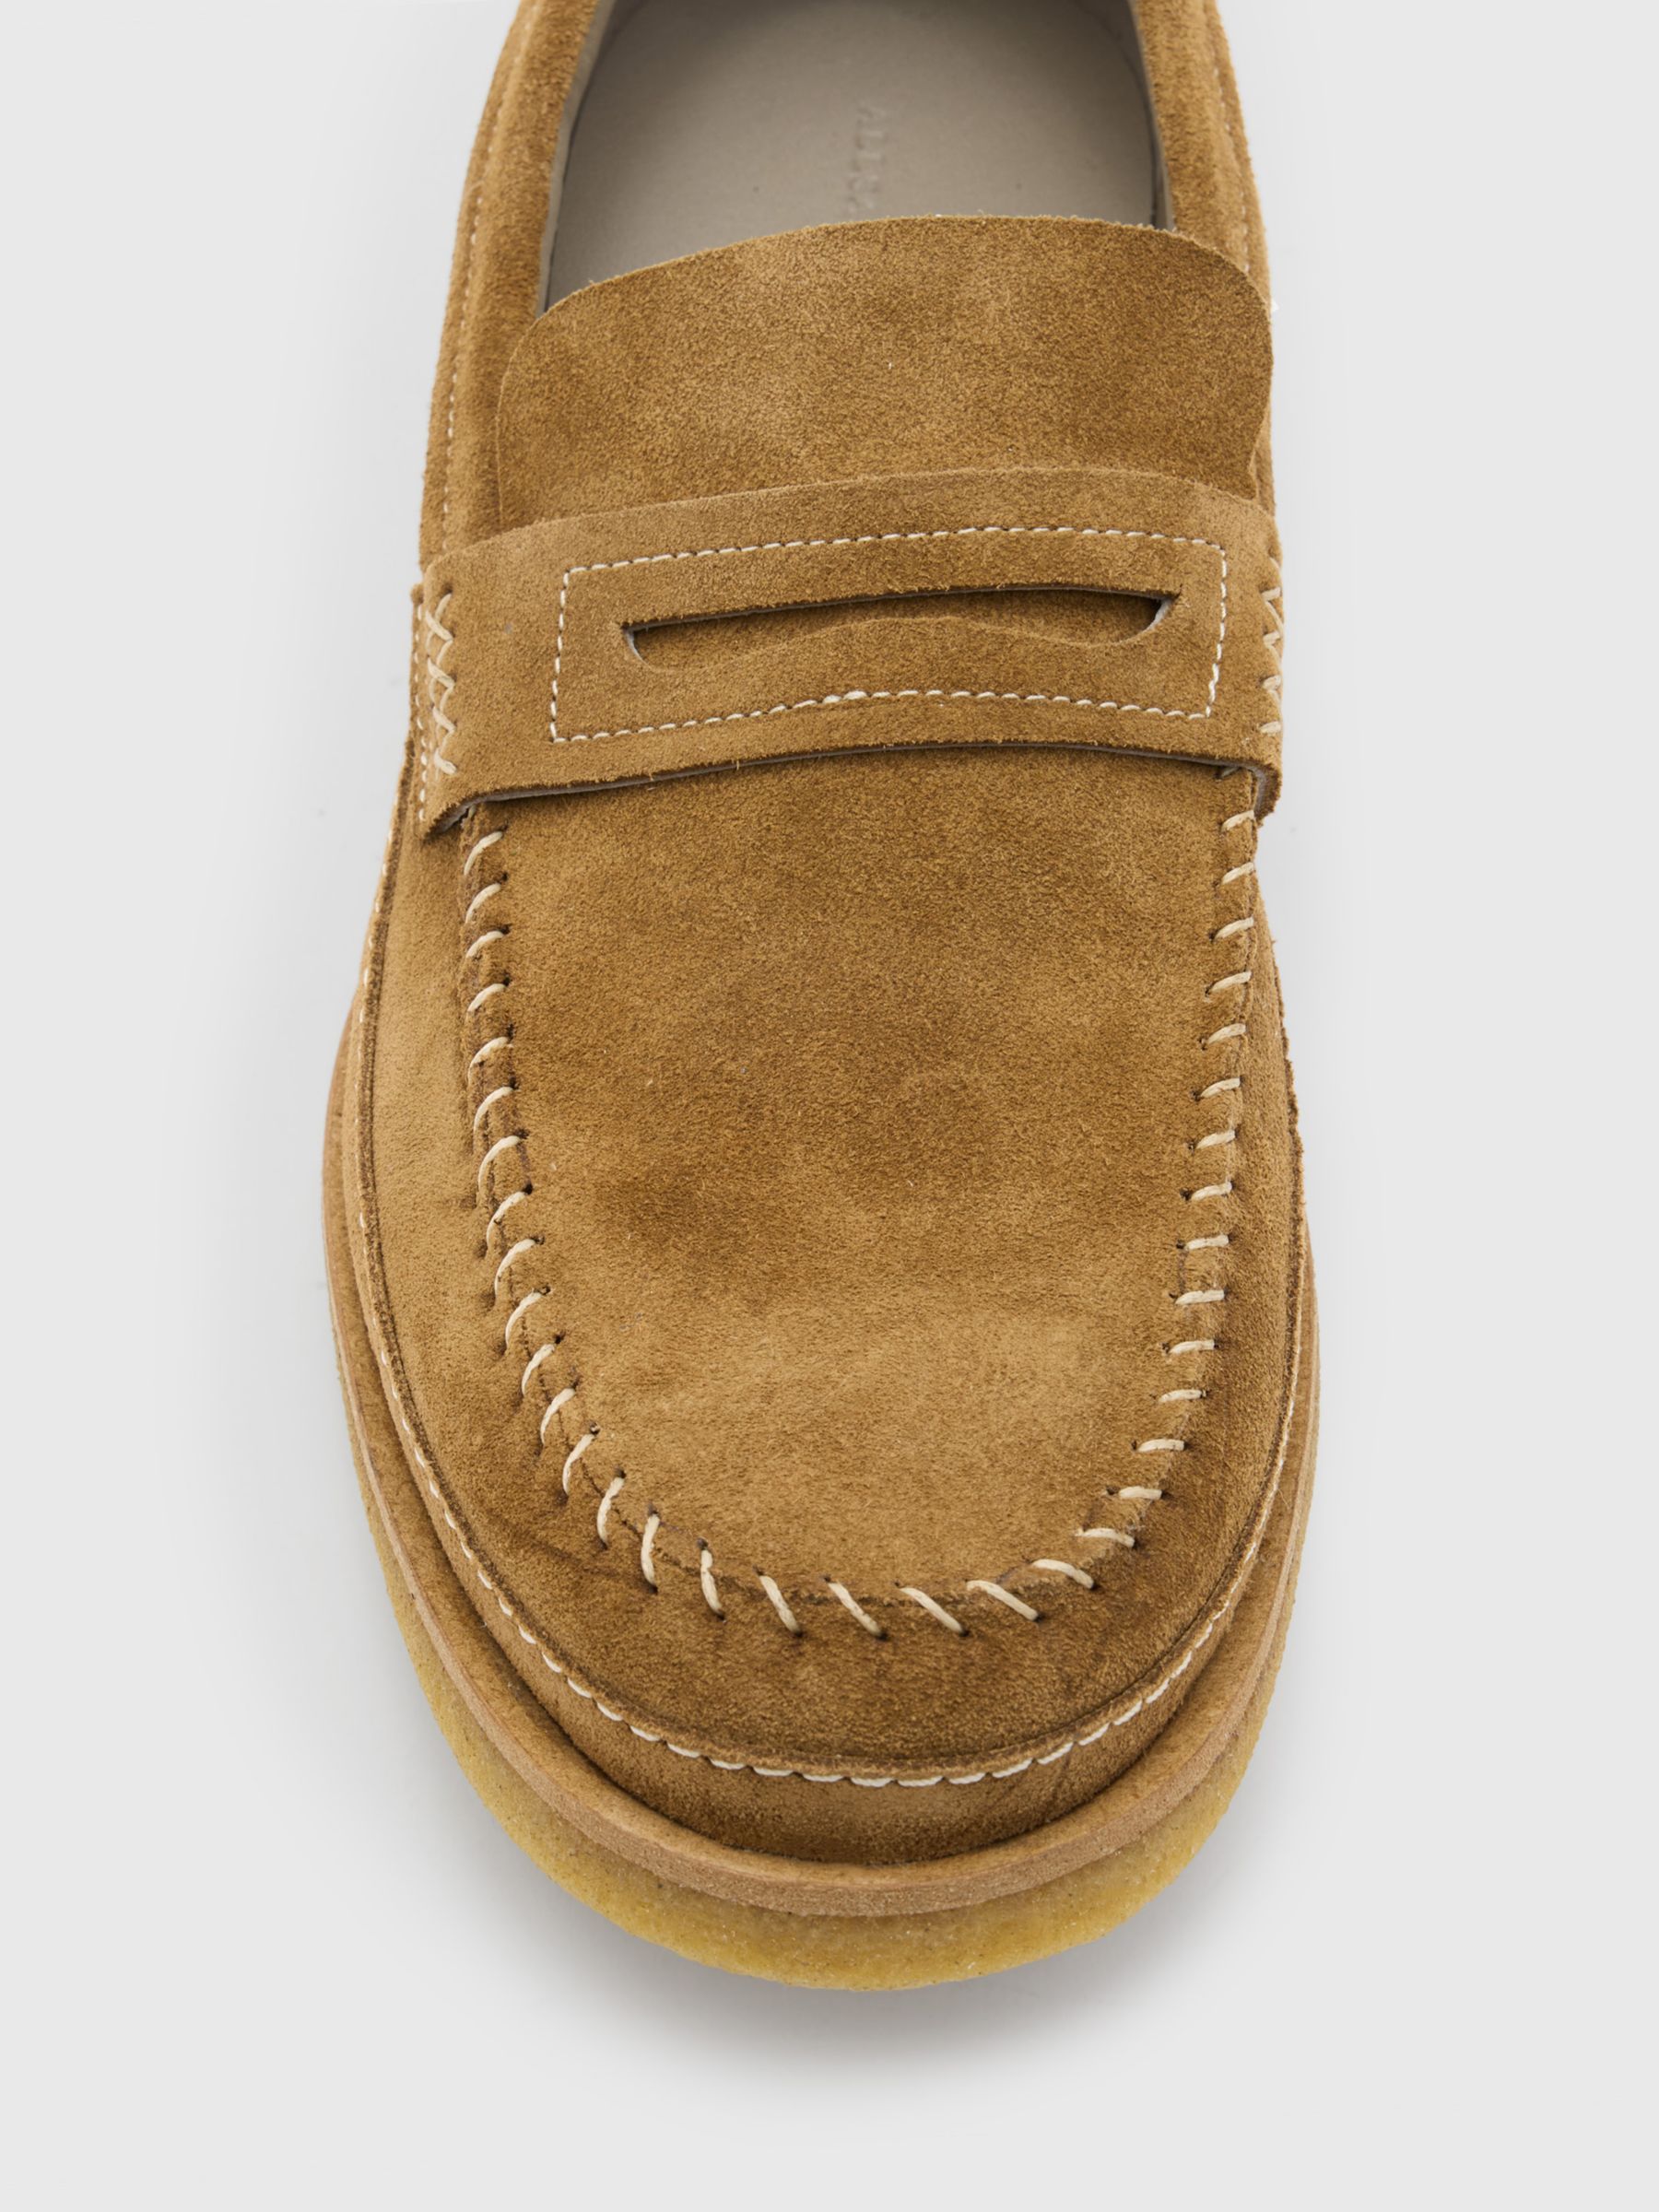 Buy AllSaints Jago Leather Loafers, Tan Online at johnlewis.com